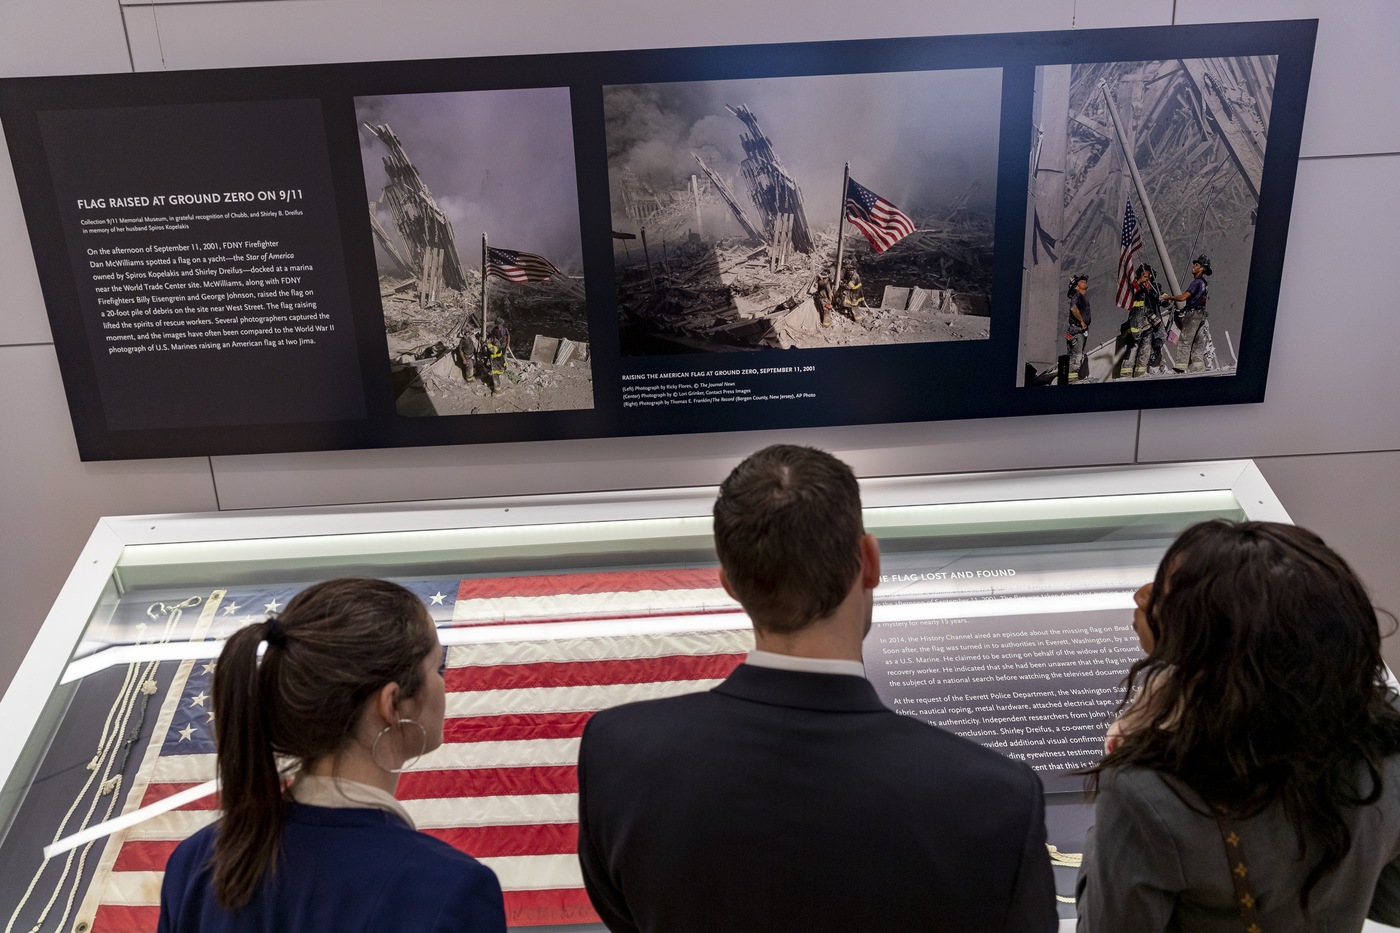 New special agents and intelligence analysts view an exhibit at the 9/11 Memorial & Museum in New York City on Saturday, March 9, 2019.